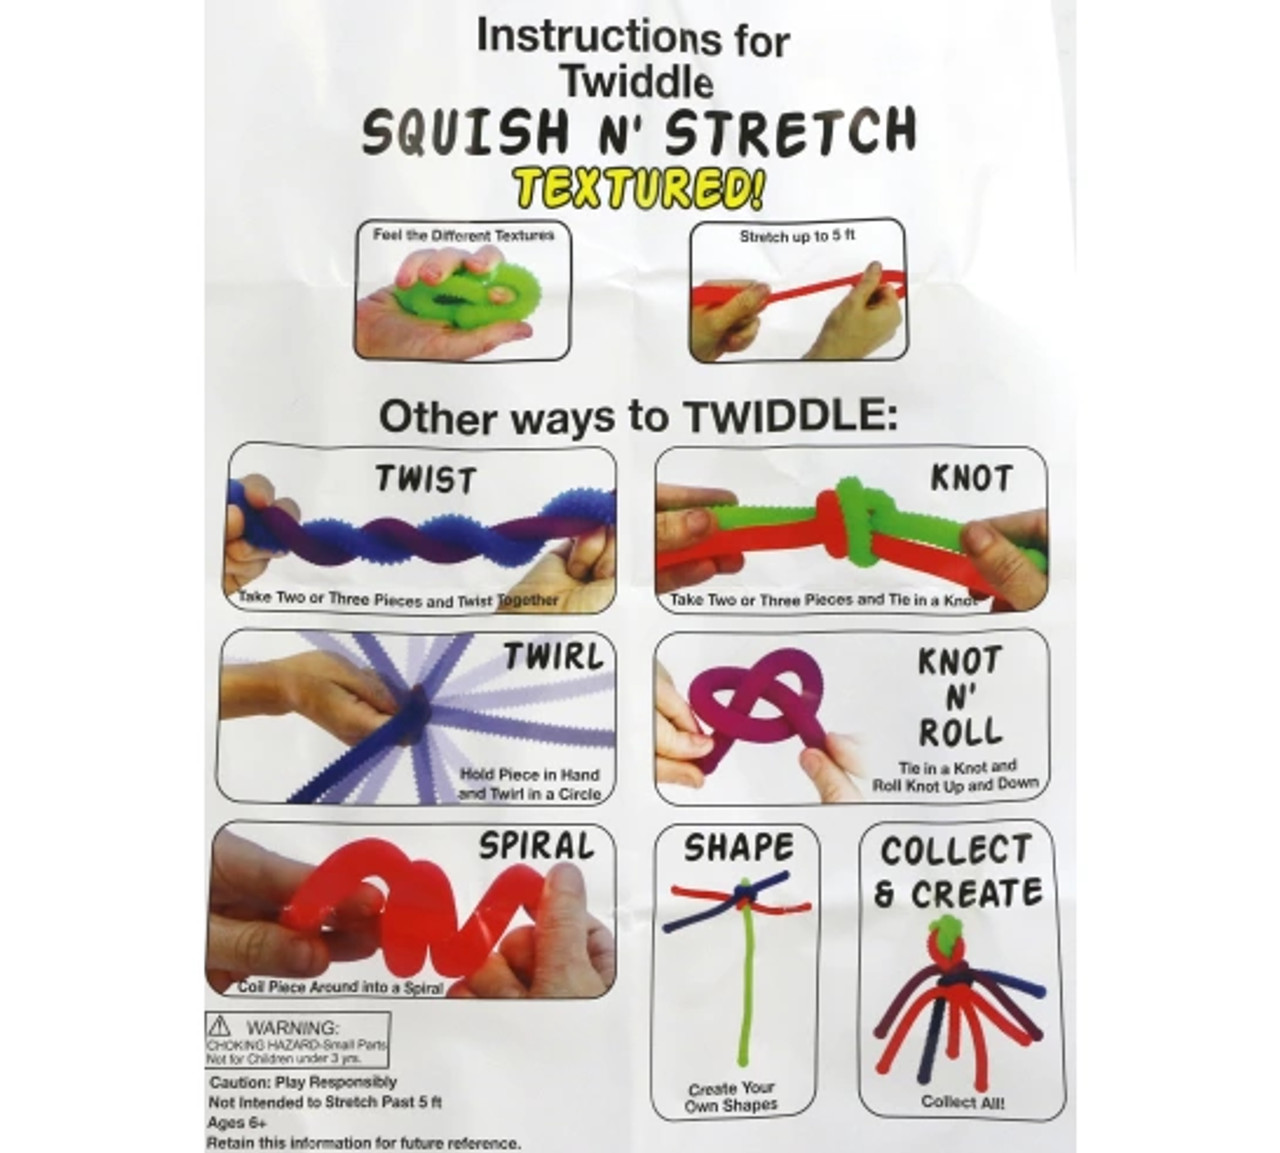 Twiddle Squish And Stretch Textured